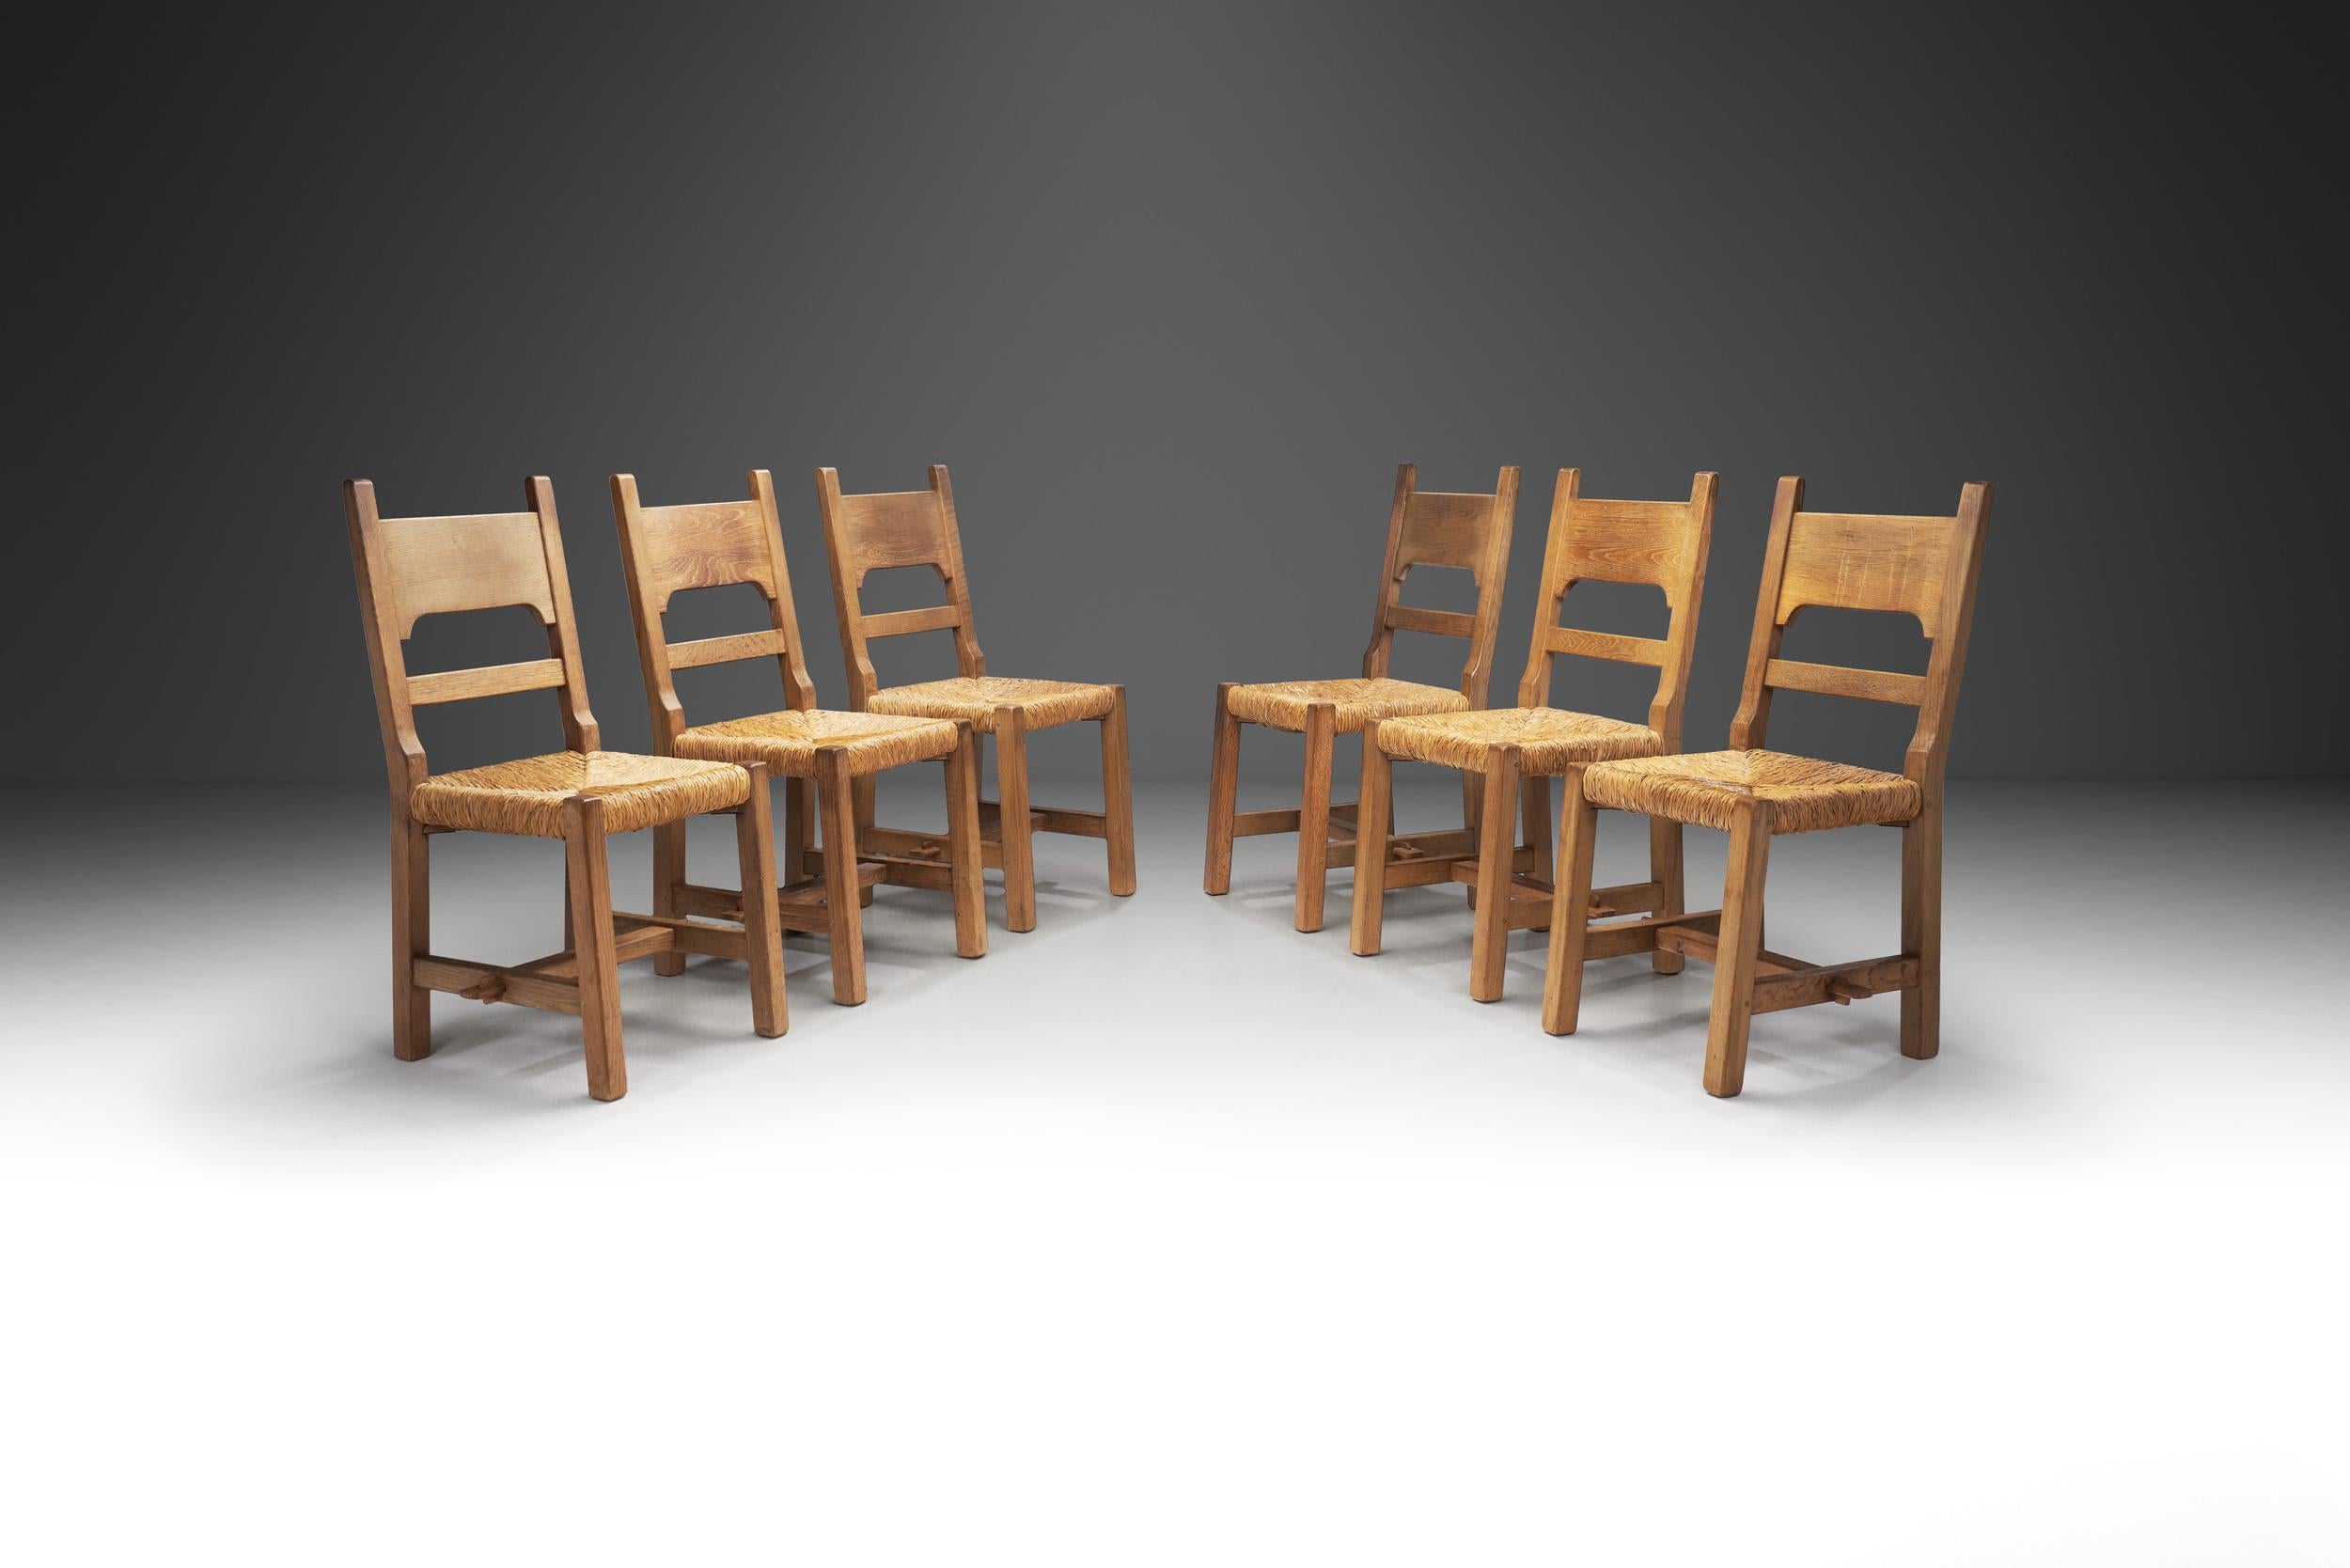 In mid-century furniture design, the marriage of organic materials and the brutalist style found its apotheosis in pieces such as this set of six chairs. These chairs, each a testament to the craftsmanship of the era, stand as paragons of brutalist